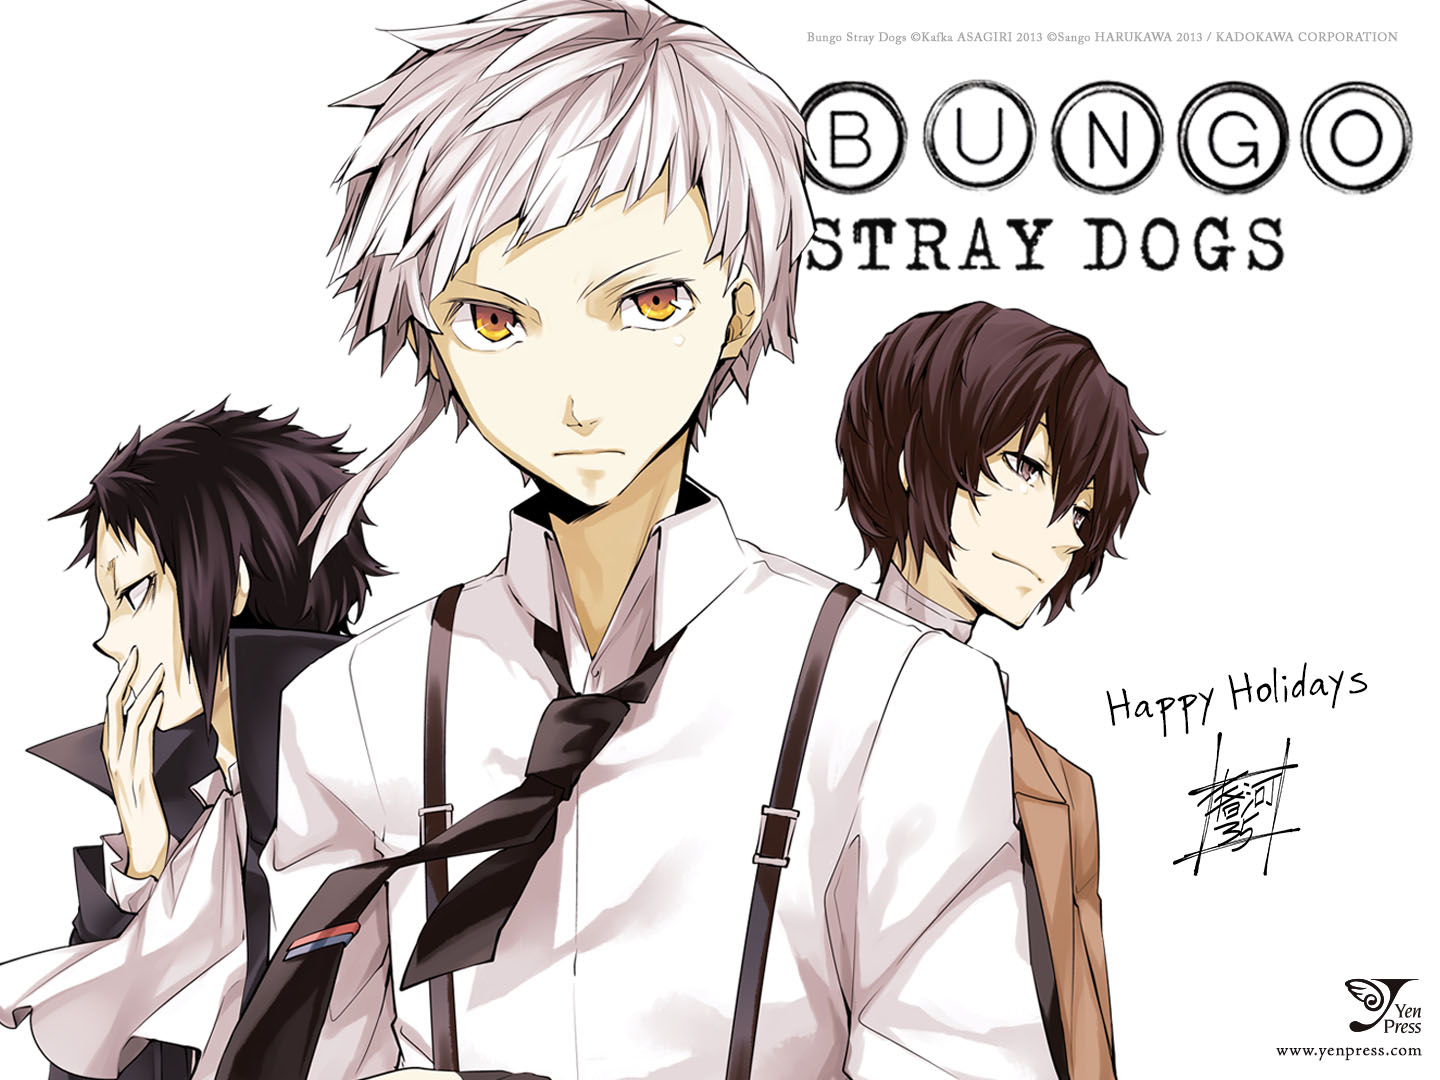 Bungowallpaper3 - Bungo Stray Dogs , HD Wallpaper & Backgrounds